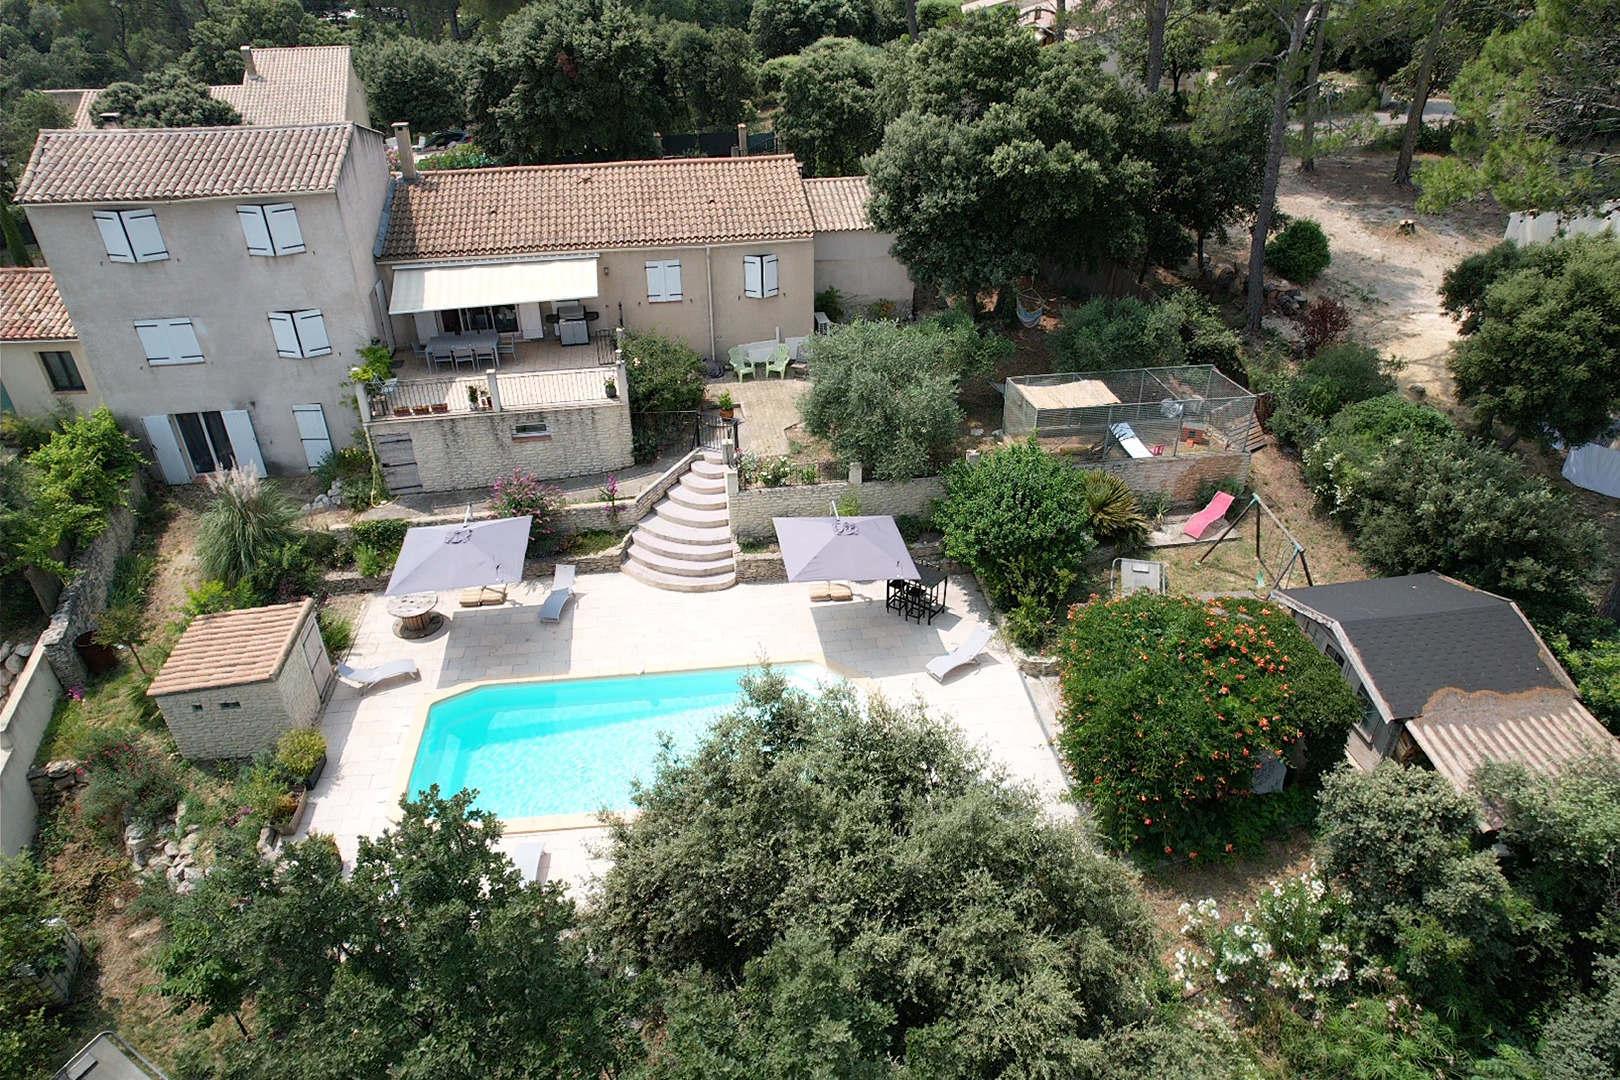 Property Image 1 - villa with pool and beautiful view in the luberon in pujet sur durance - 10